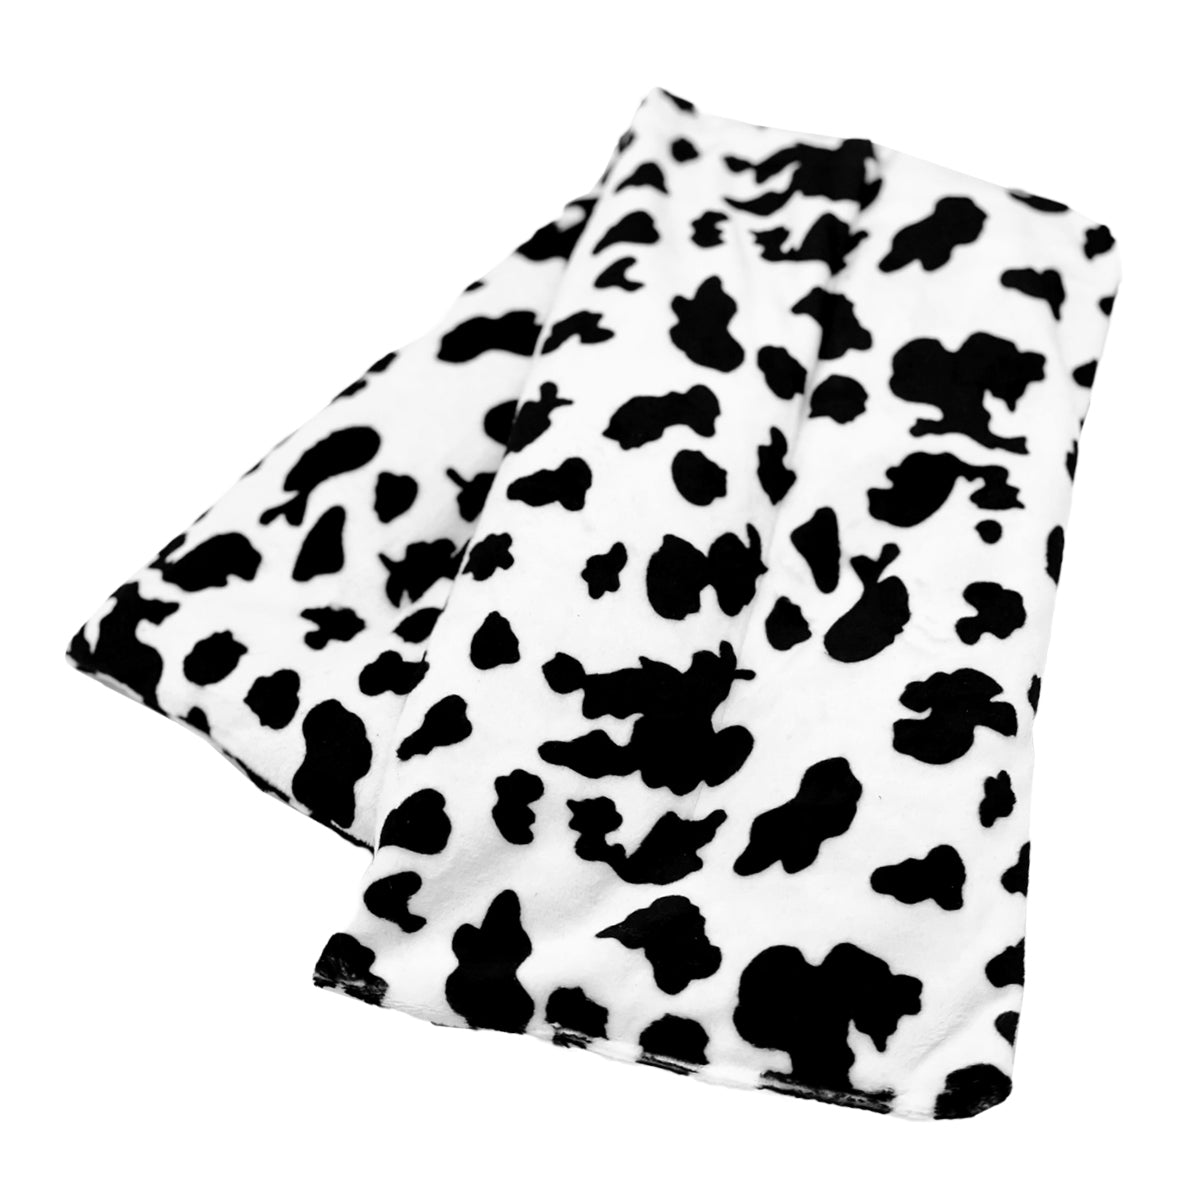 Soothing Body Wrap Wheat Bag Infused with Lavender Oil - Cow Print